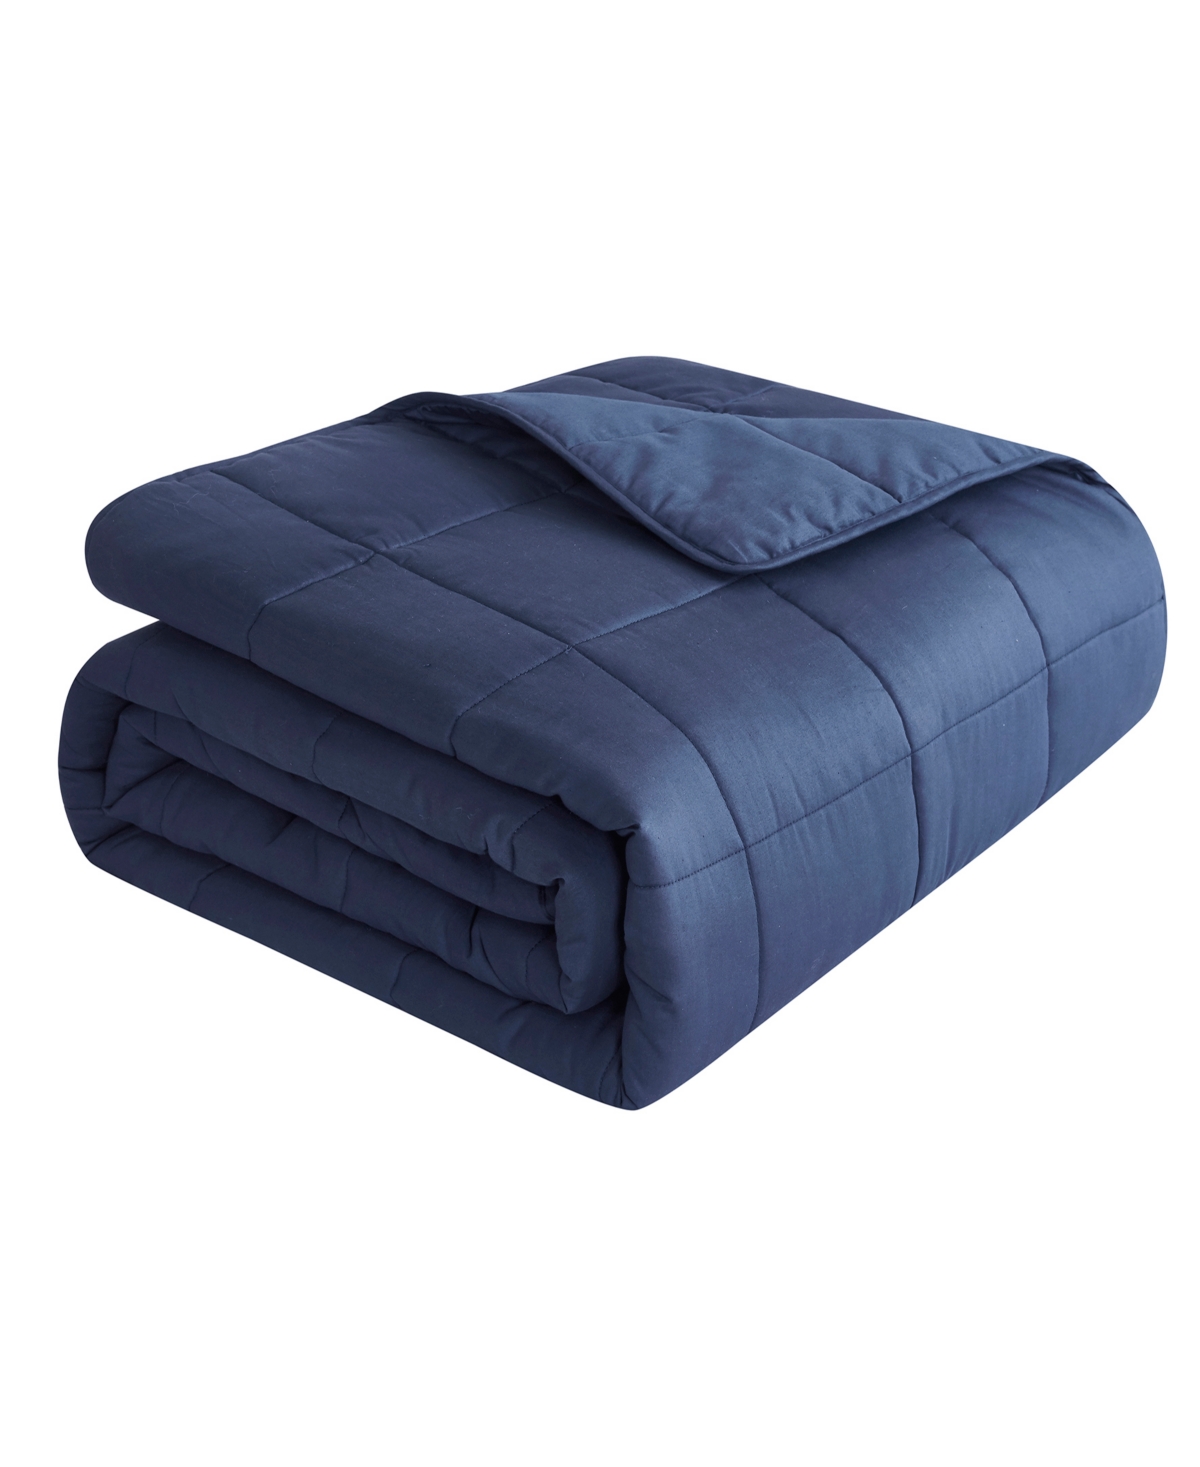 Dream Theory Cotton Weighted 20 Lbs Blanket, Full/queen Bedding In Navy